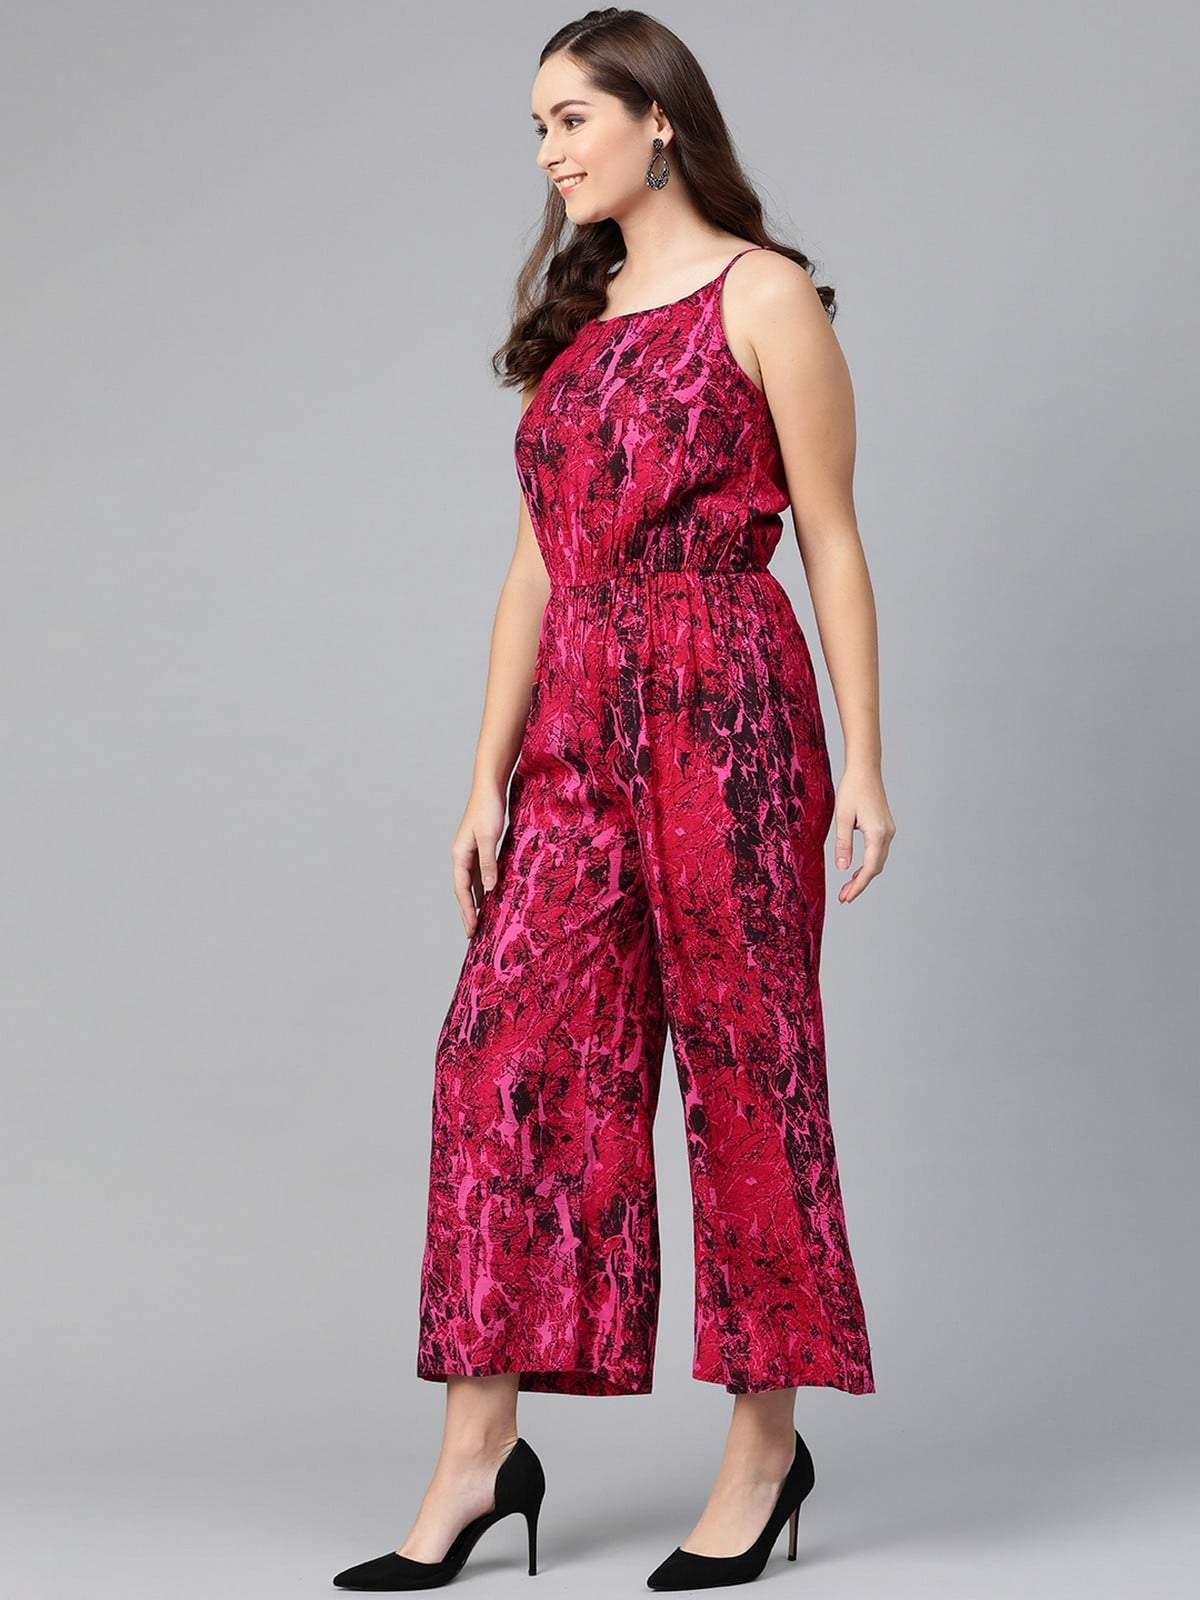 Women's Printed Strappy Jumpsuit - Pannkh